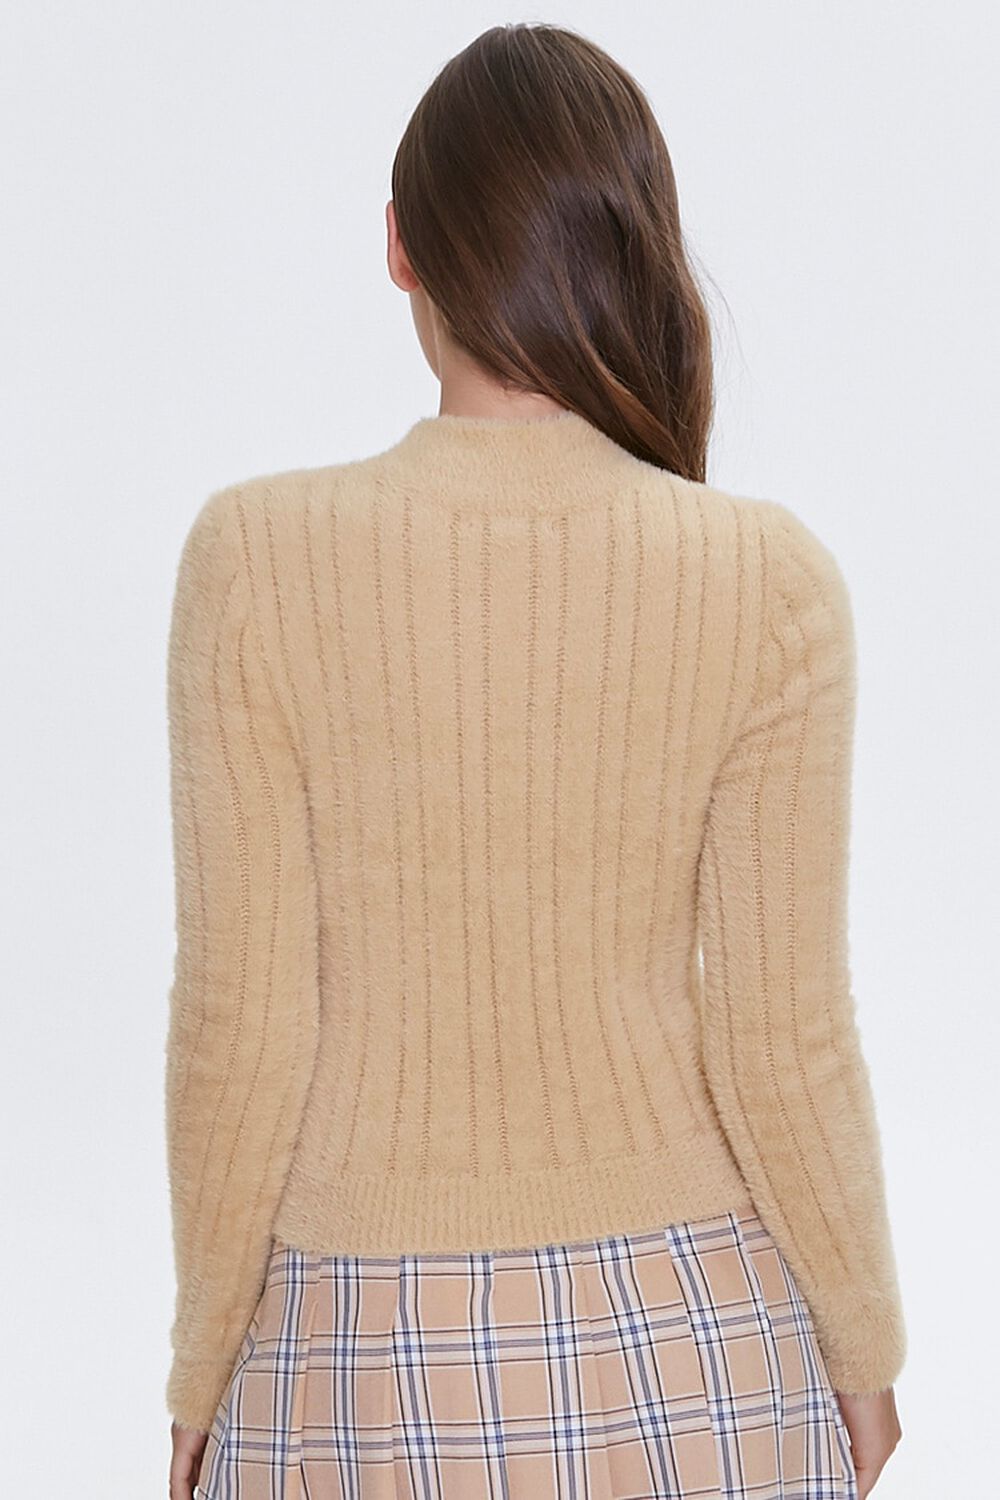 TAUPE Fuzzy Knit Mock Neck Top, image 3